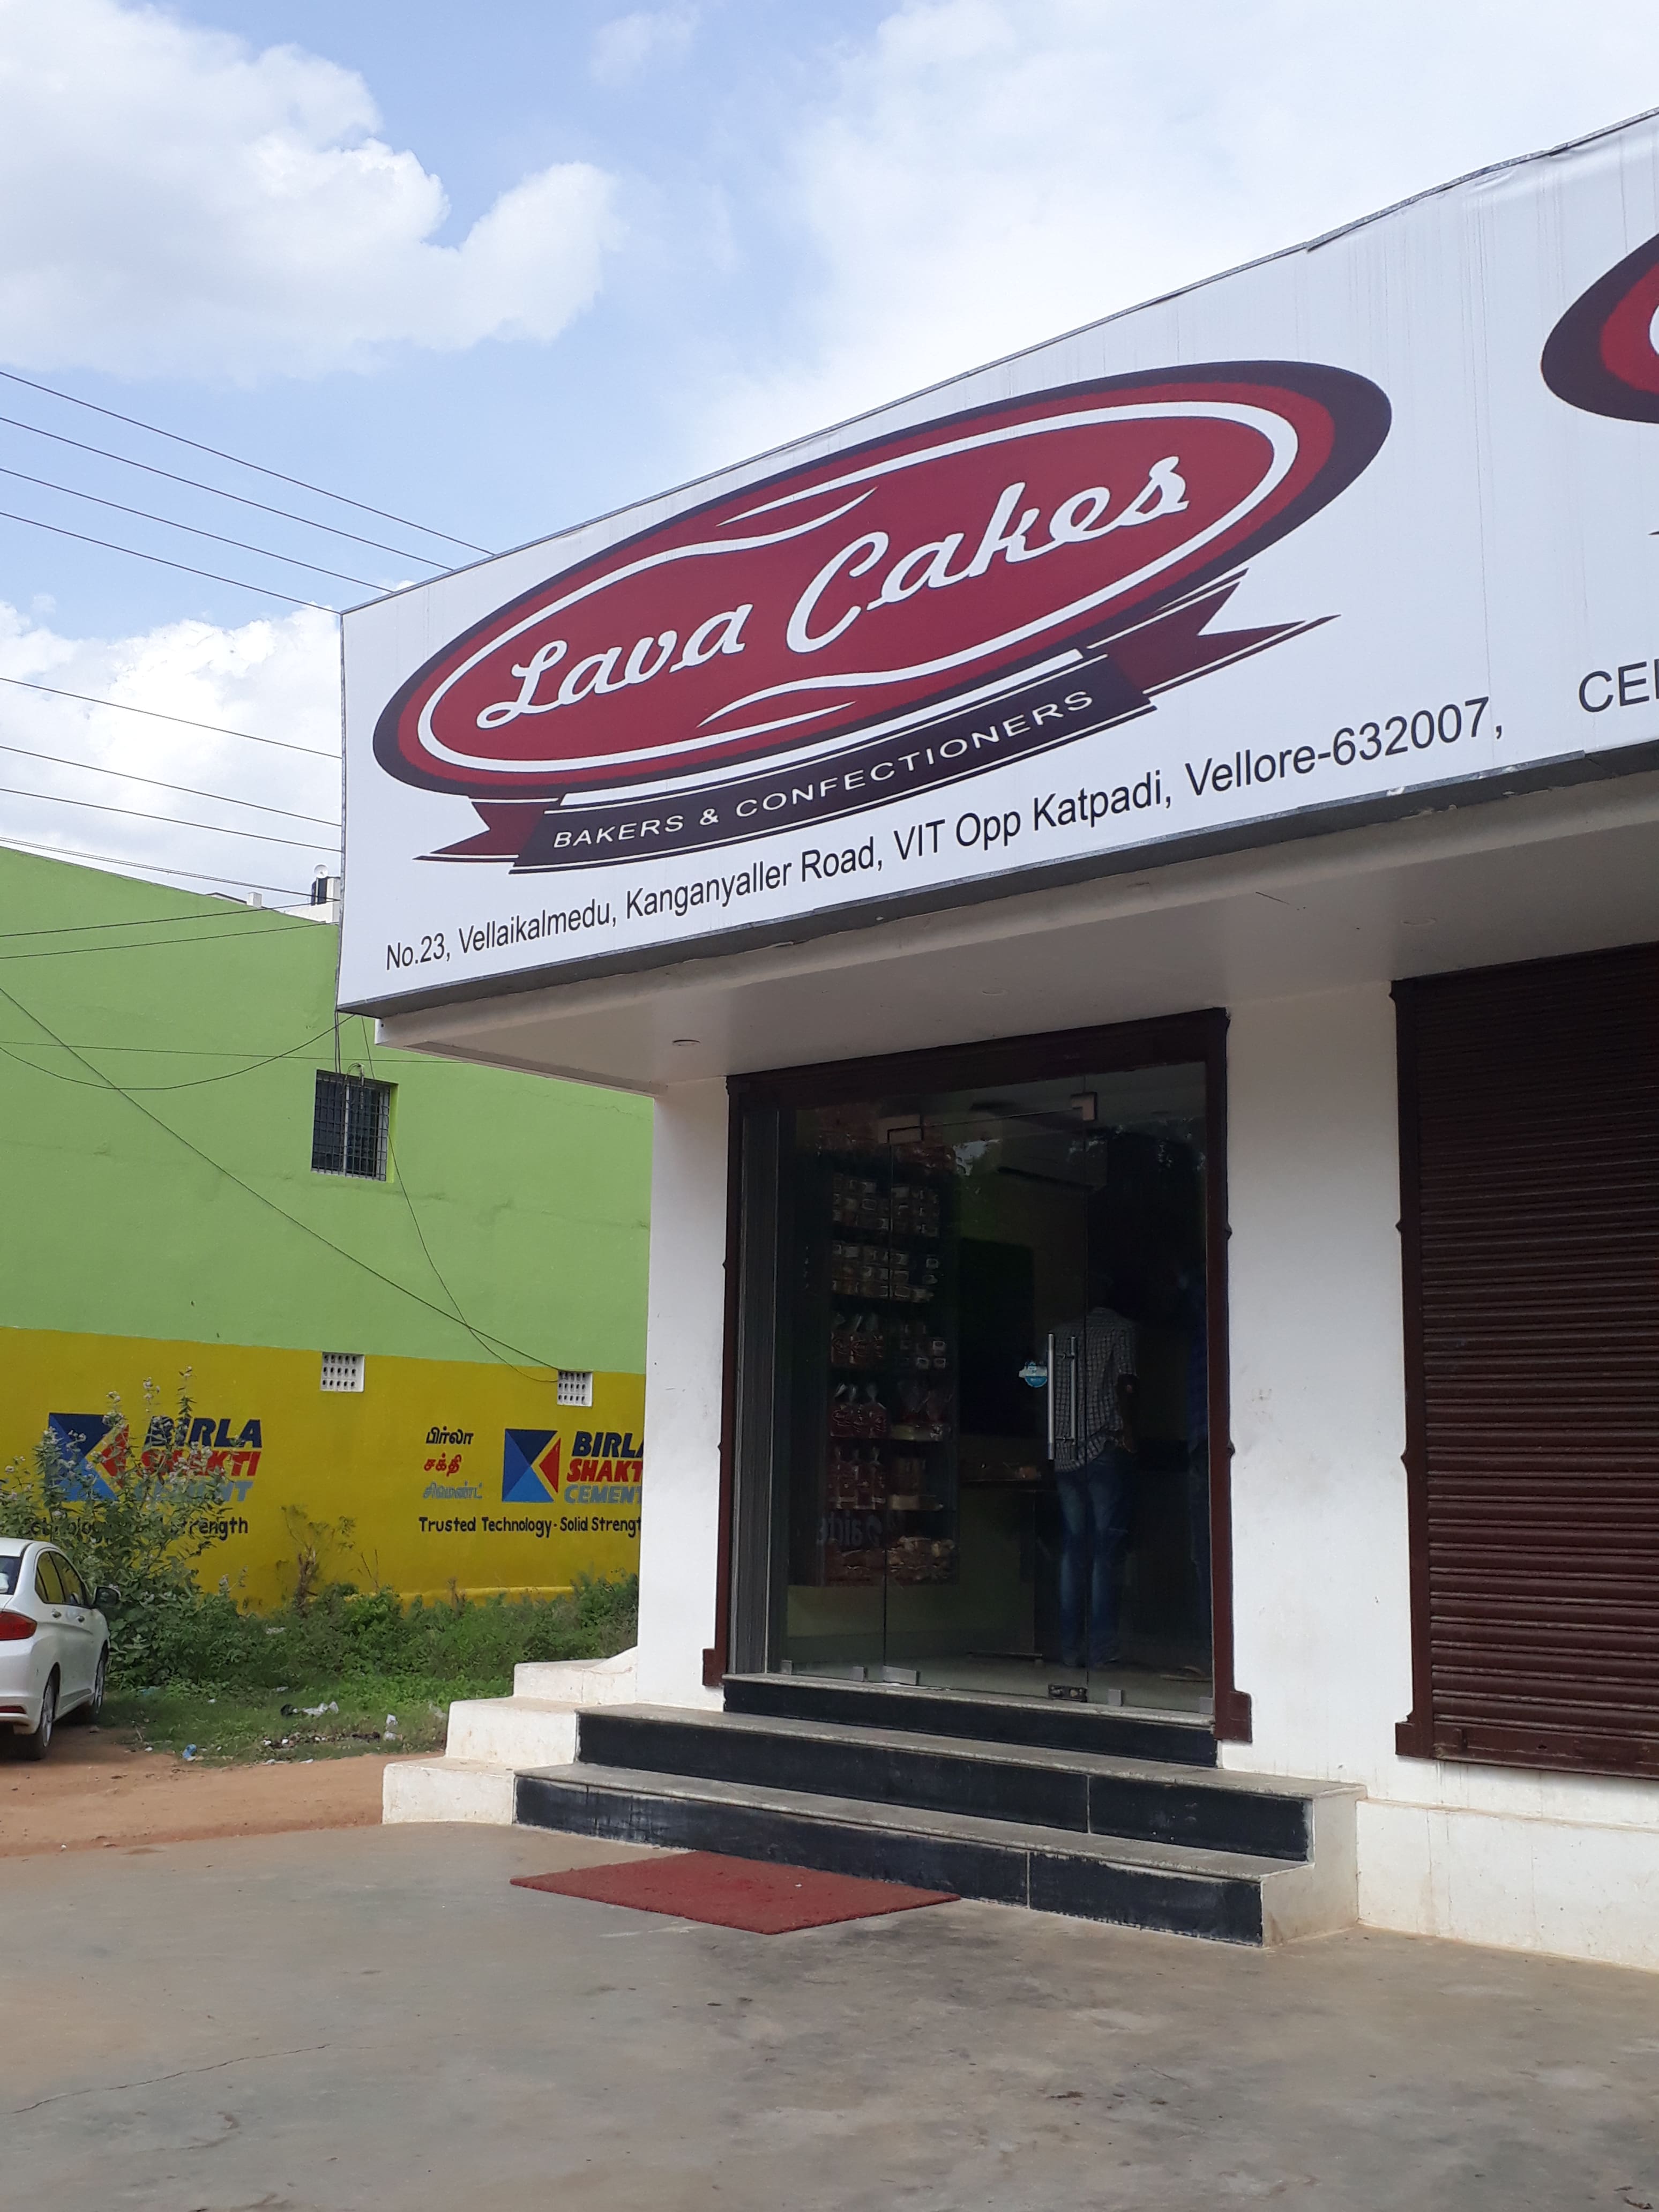 Lava Cakes in Cmc,Vellore - Order Food Online - Best Cake Shops in Vellore  - Justdial